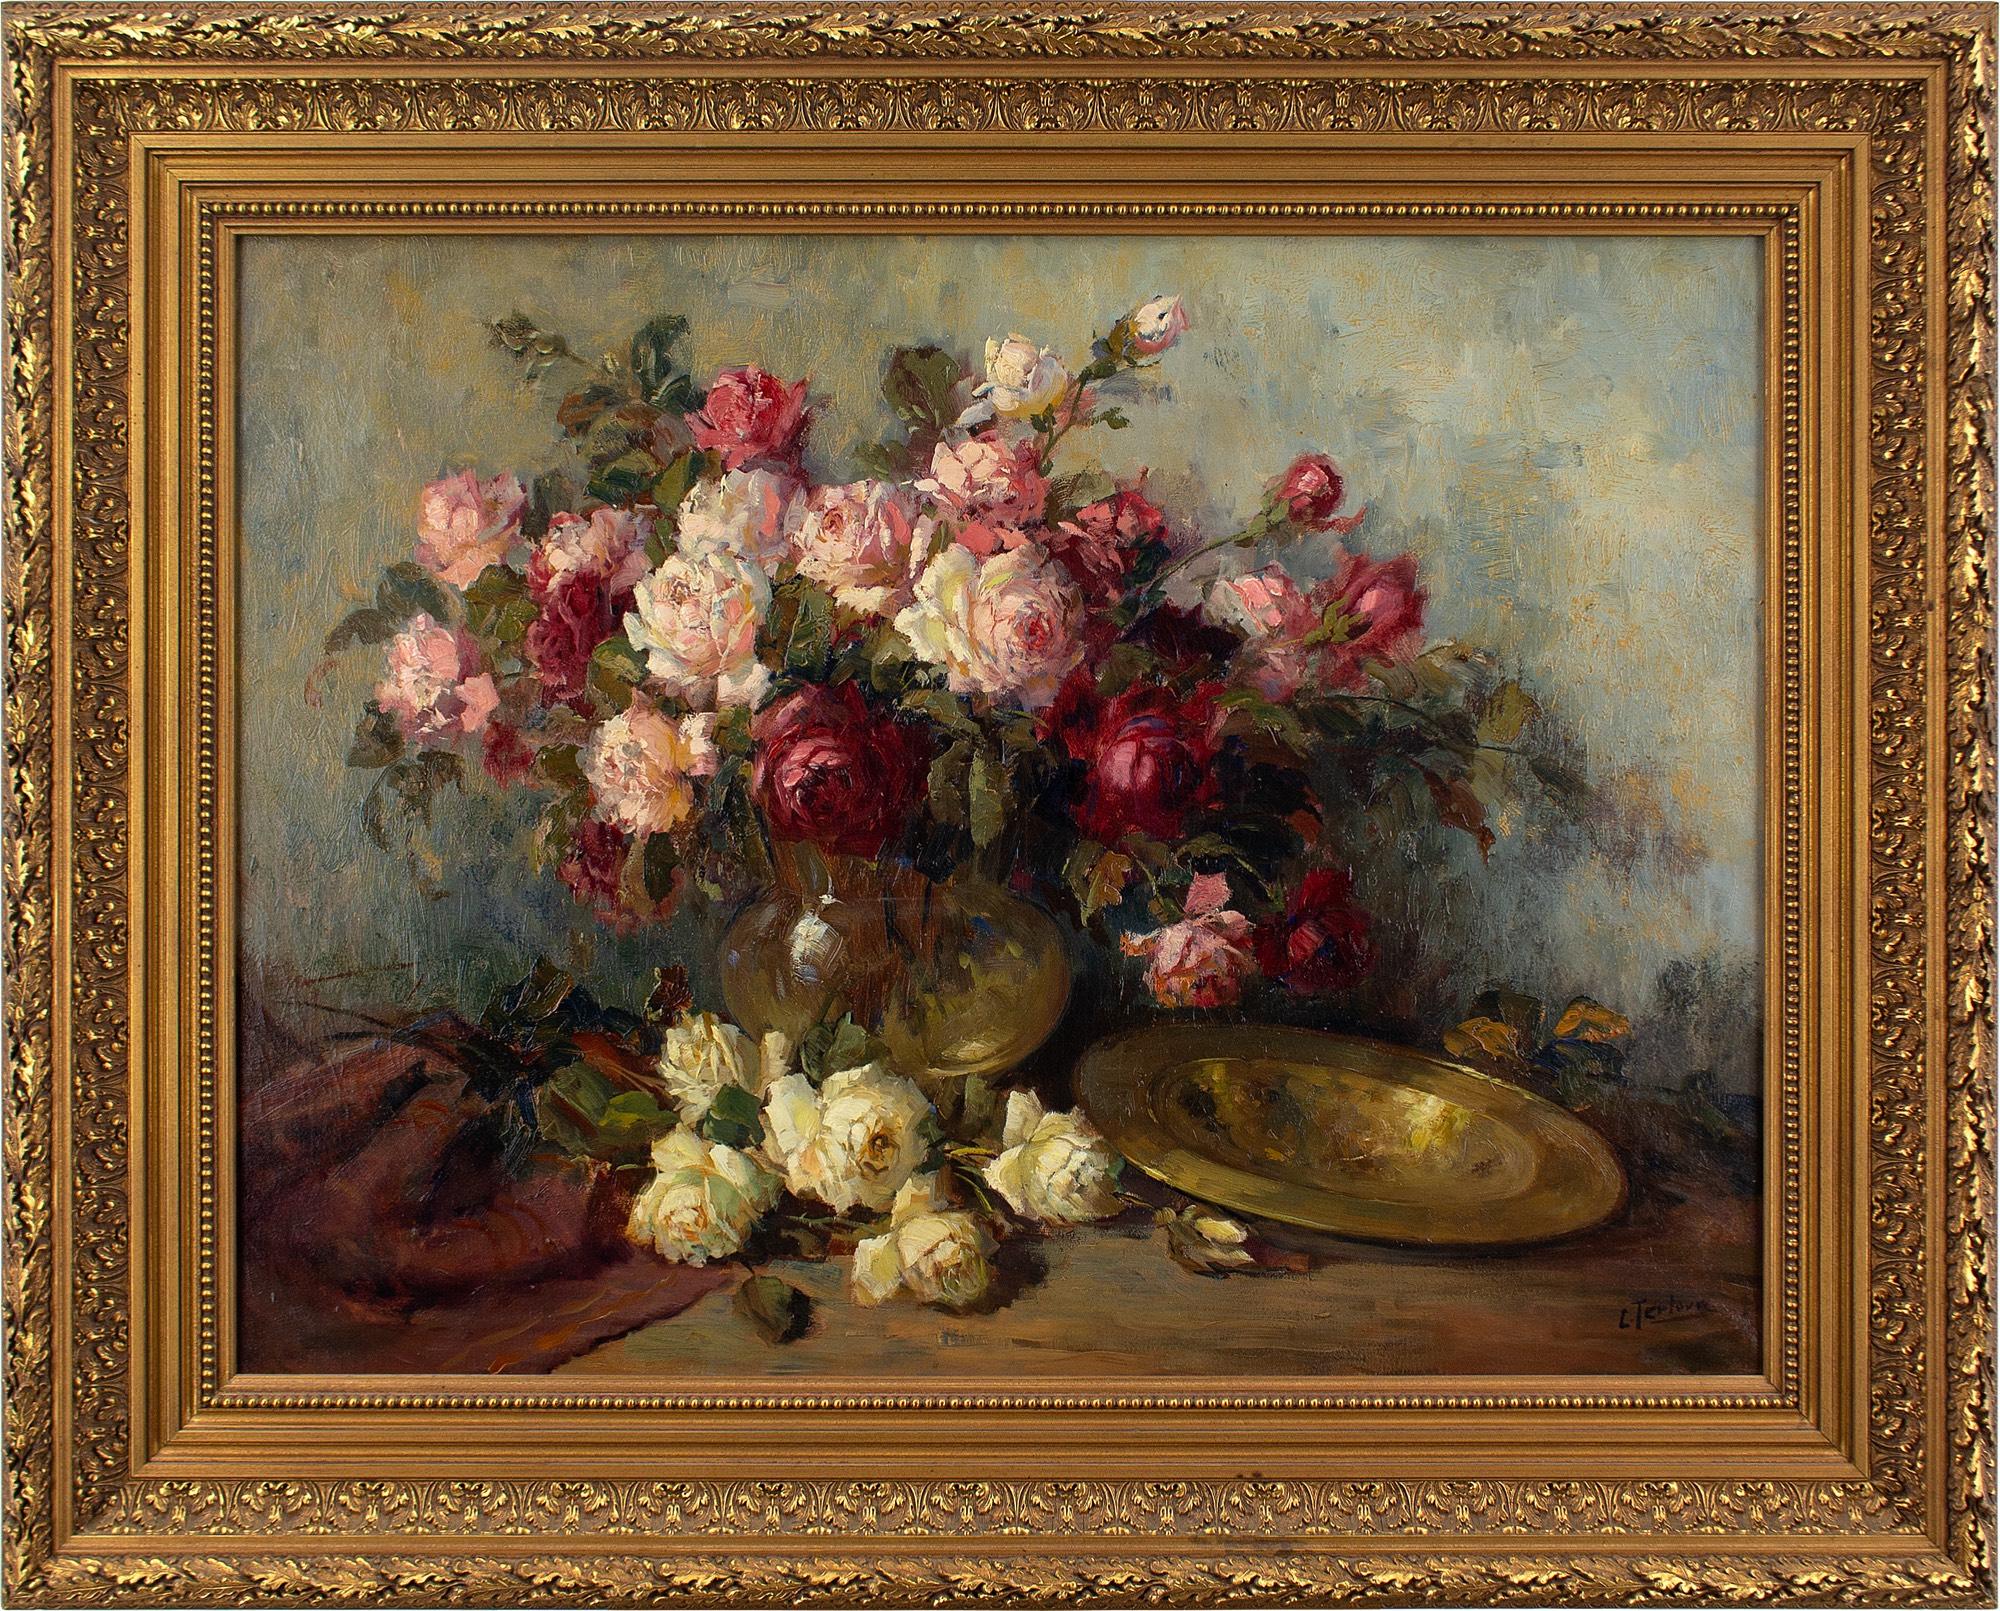 This beautiful mid-20th-century oil painting by Dutch artist Kees Terlouw (1890-1948) depicts an abundant arrangement of red, white and pink roses set within a vase.

Vividly filling the centre of the canvas, the roses radiate in bloom. Their rich